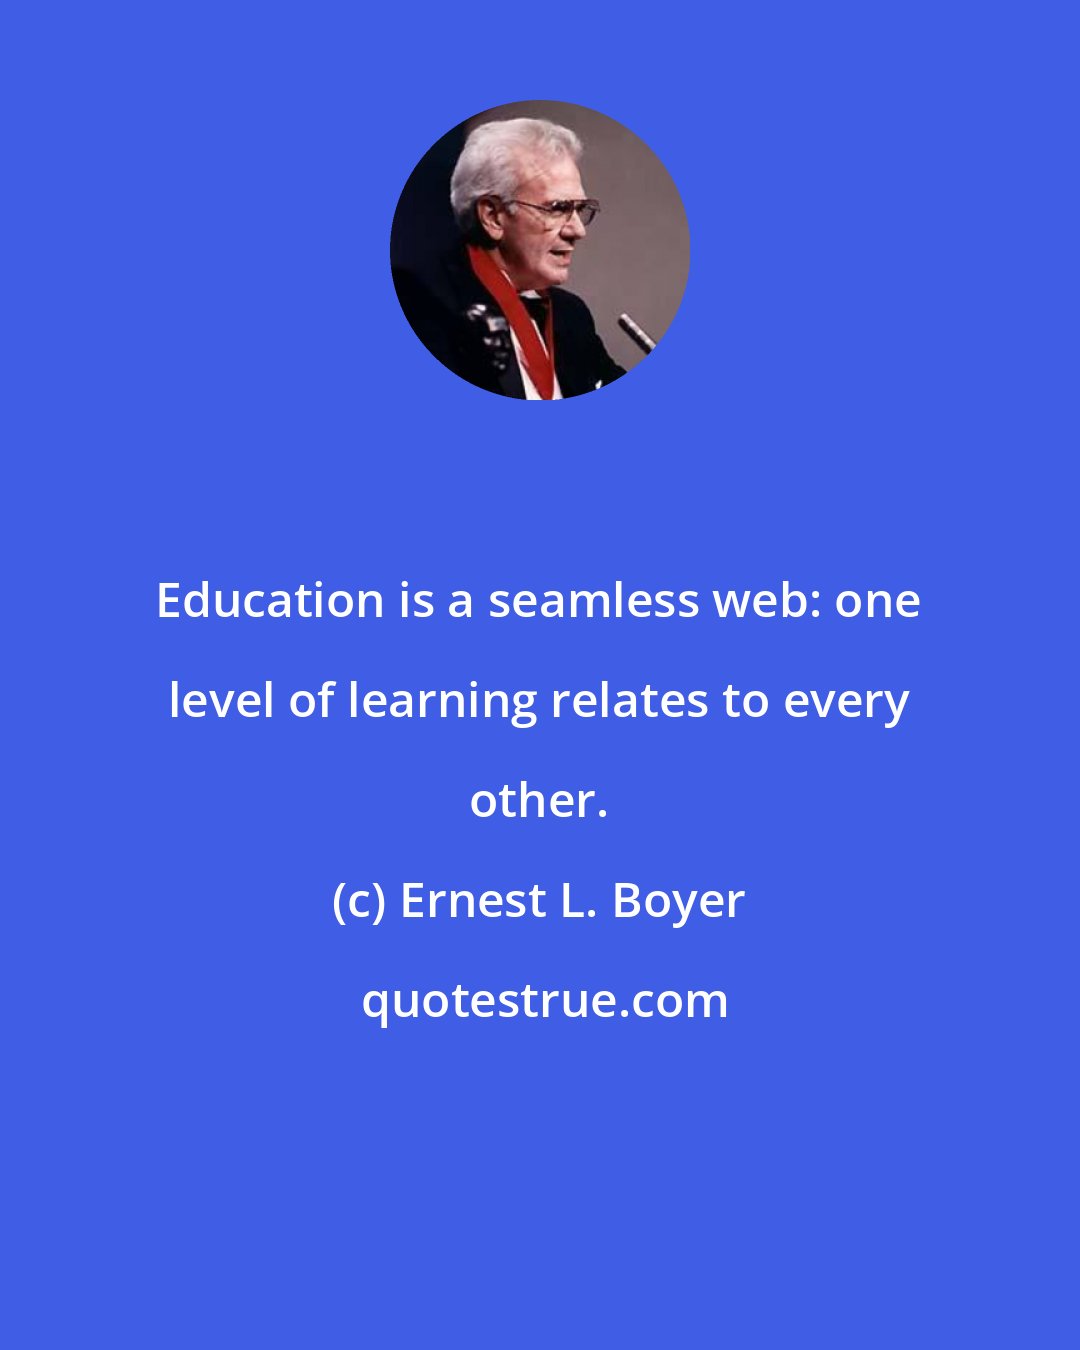 Ernest L. Boyer: Education is a seamless web: one level of learning relates to every other.